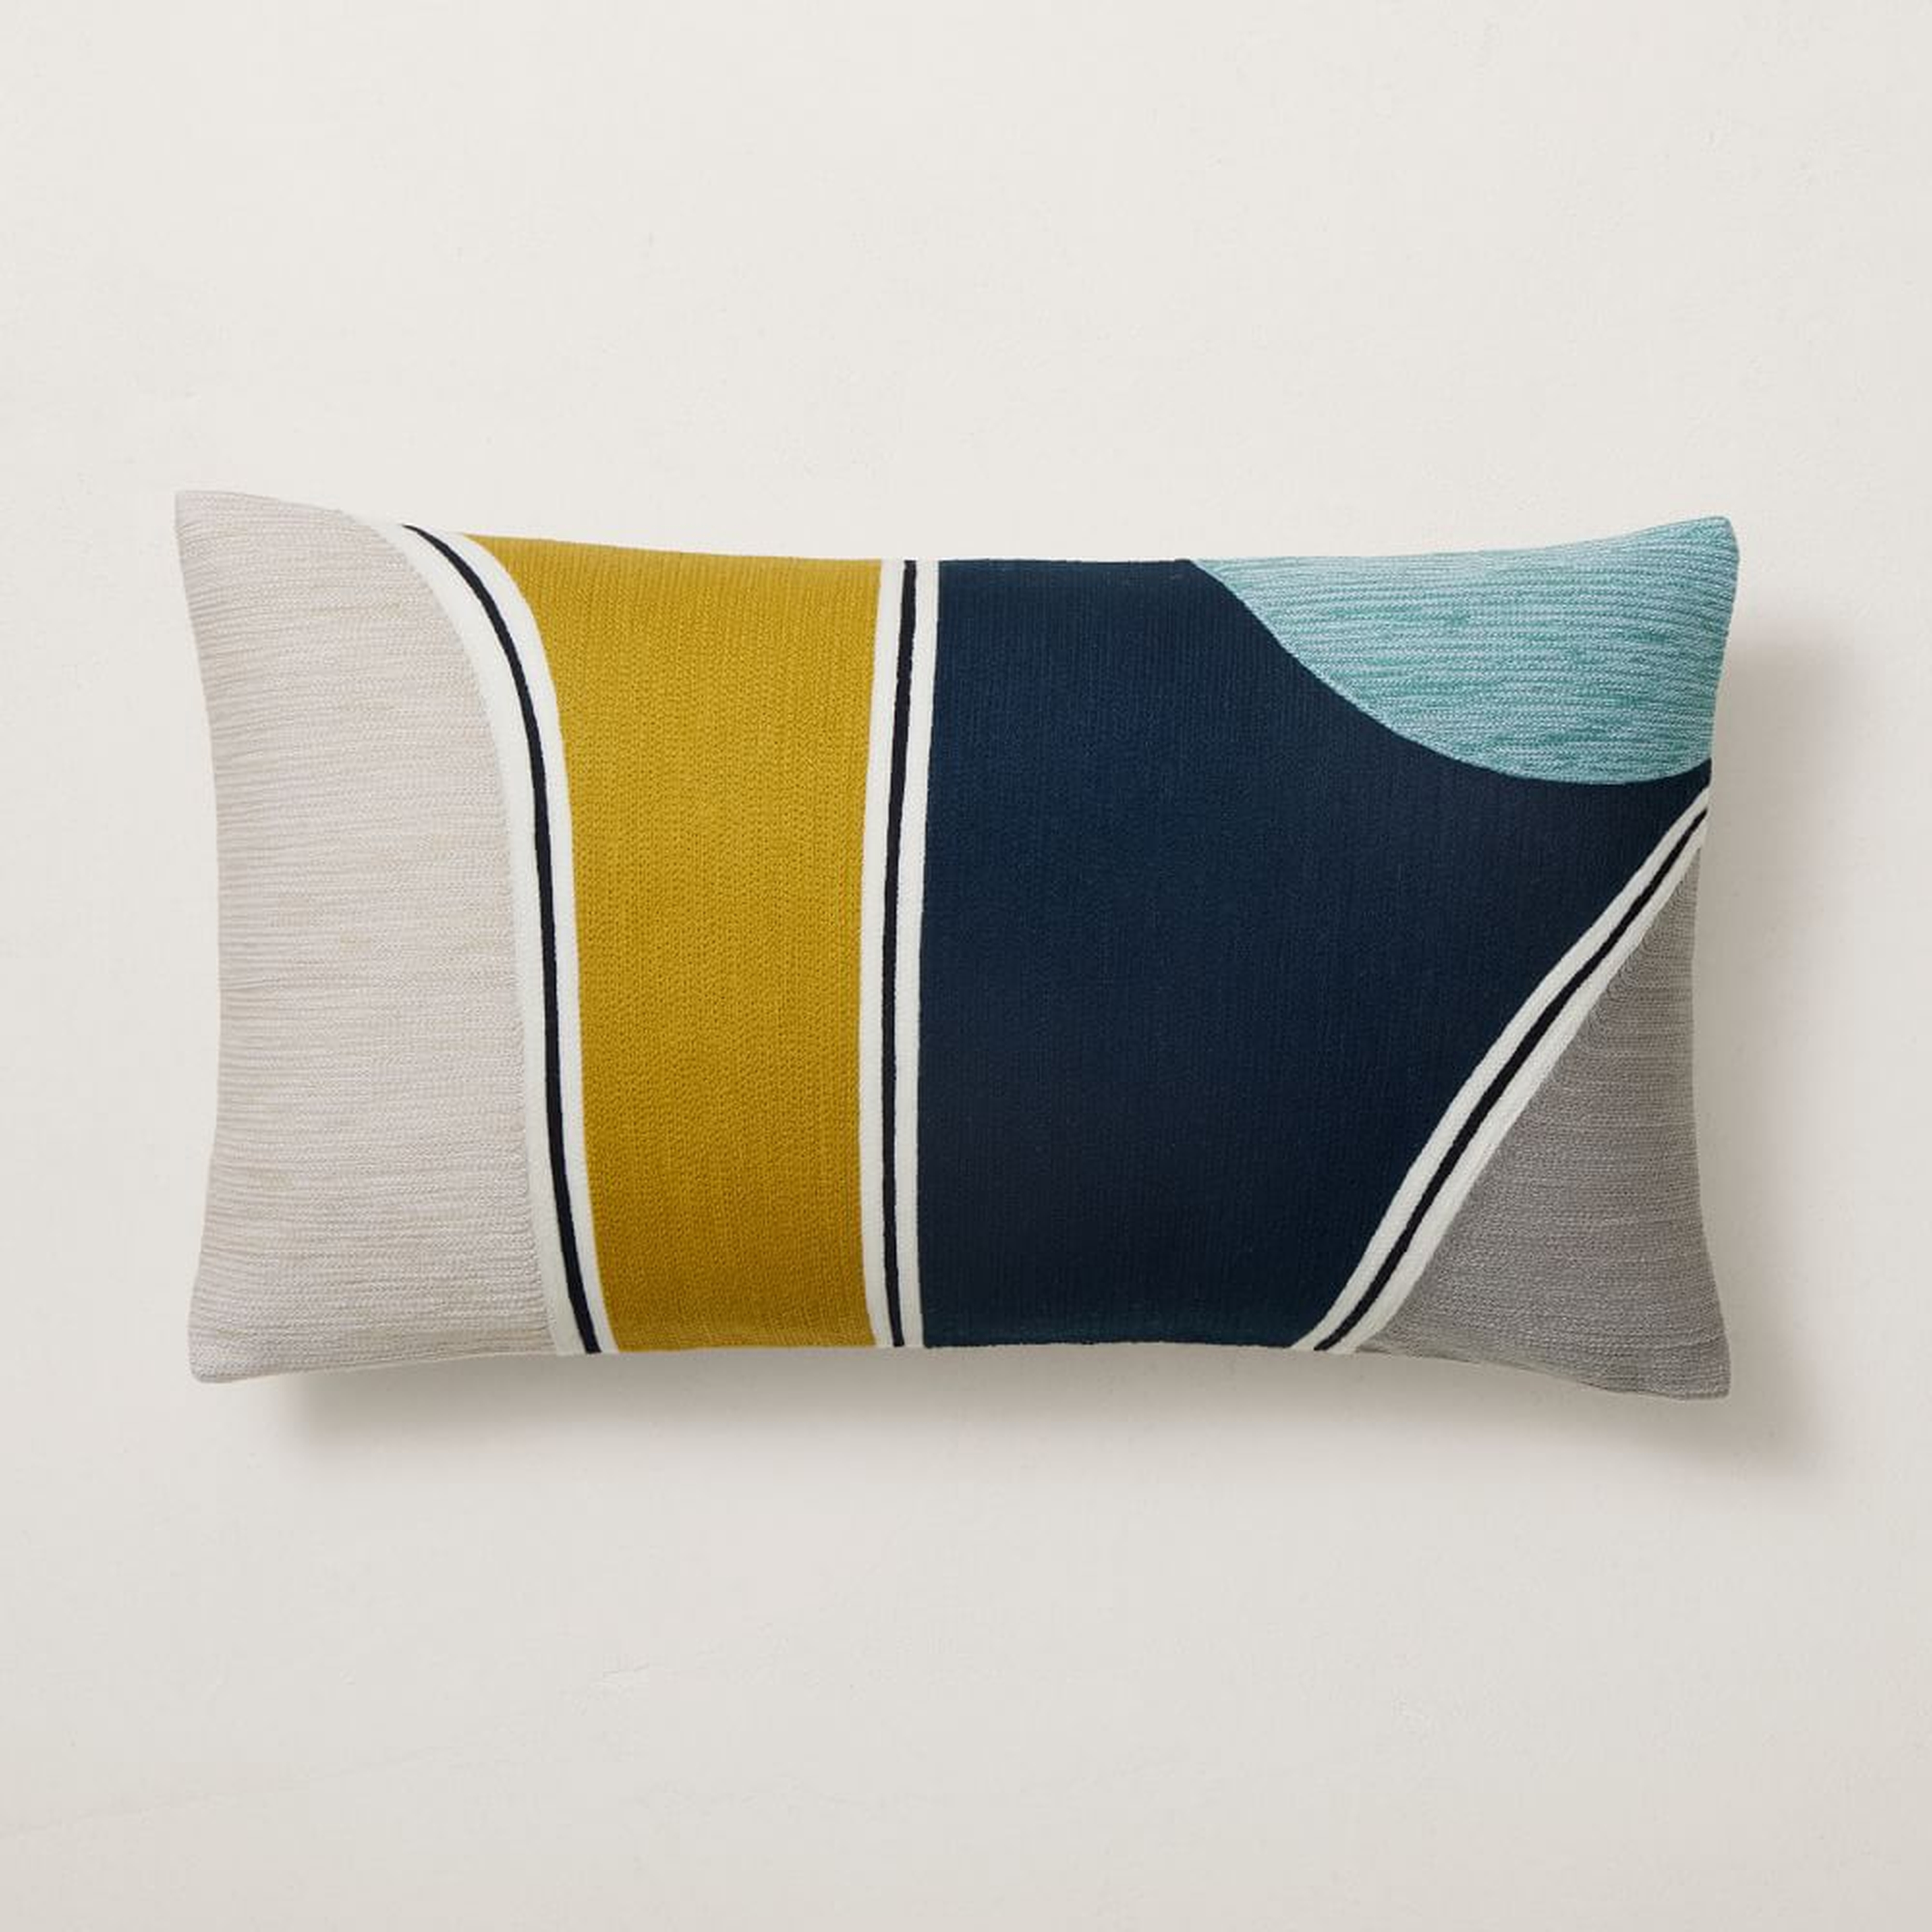 Crewel Outlined Shapes Pillow Cover, 12"x21", Midnight - West Elm